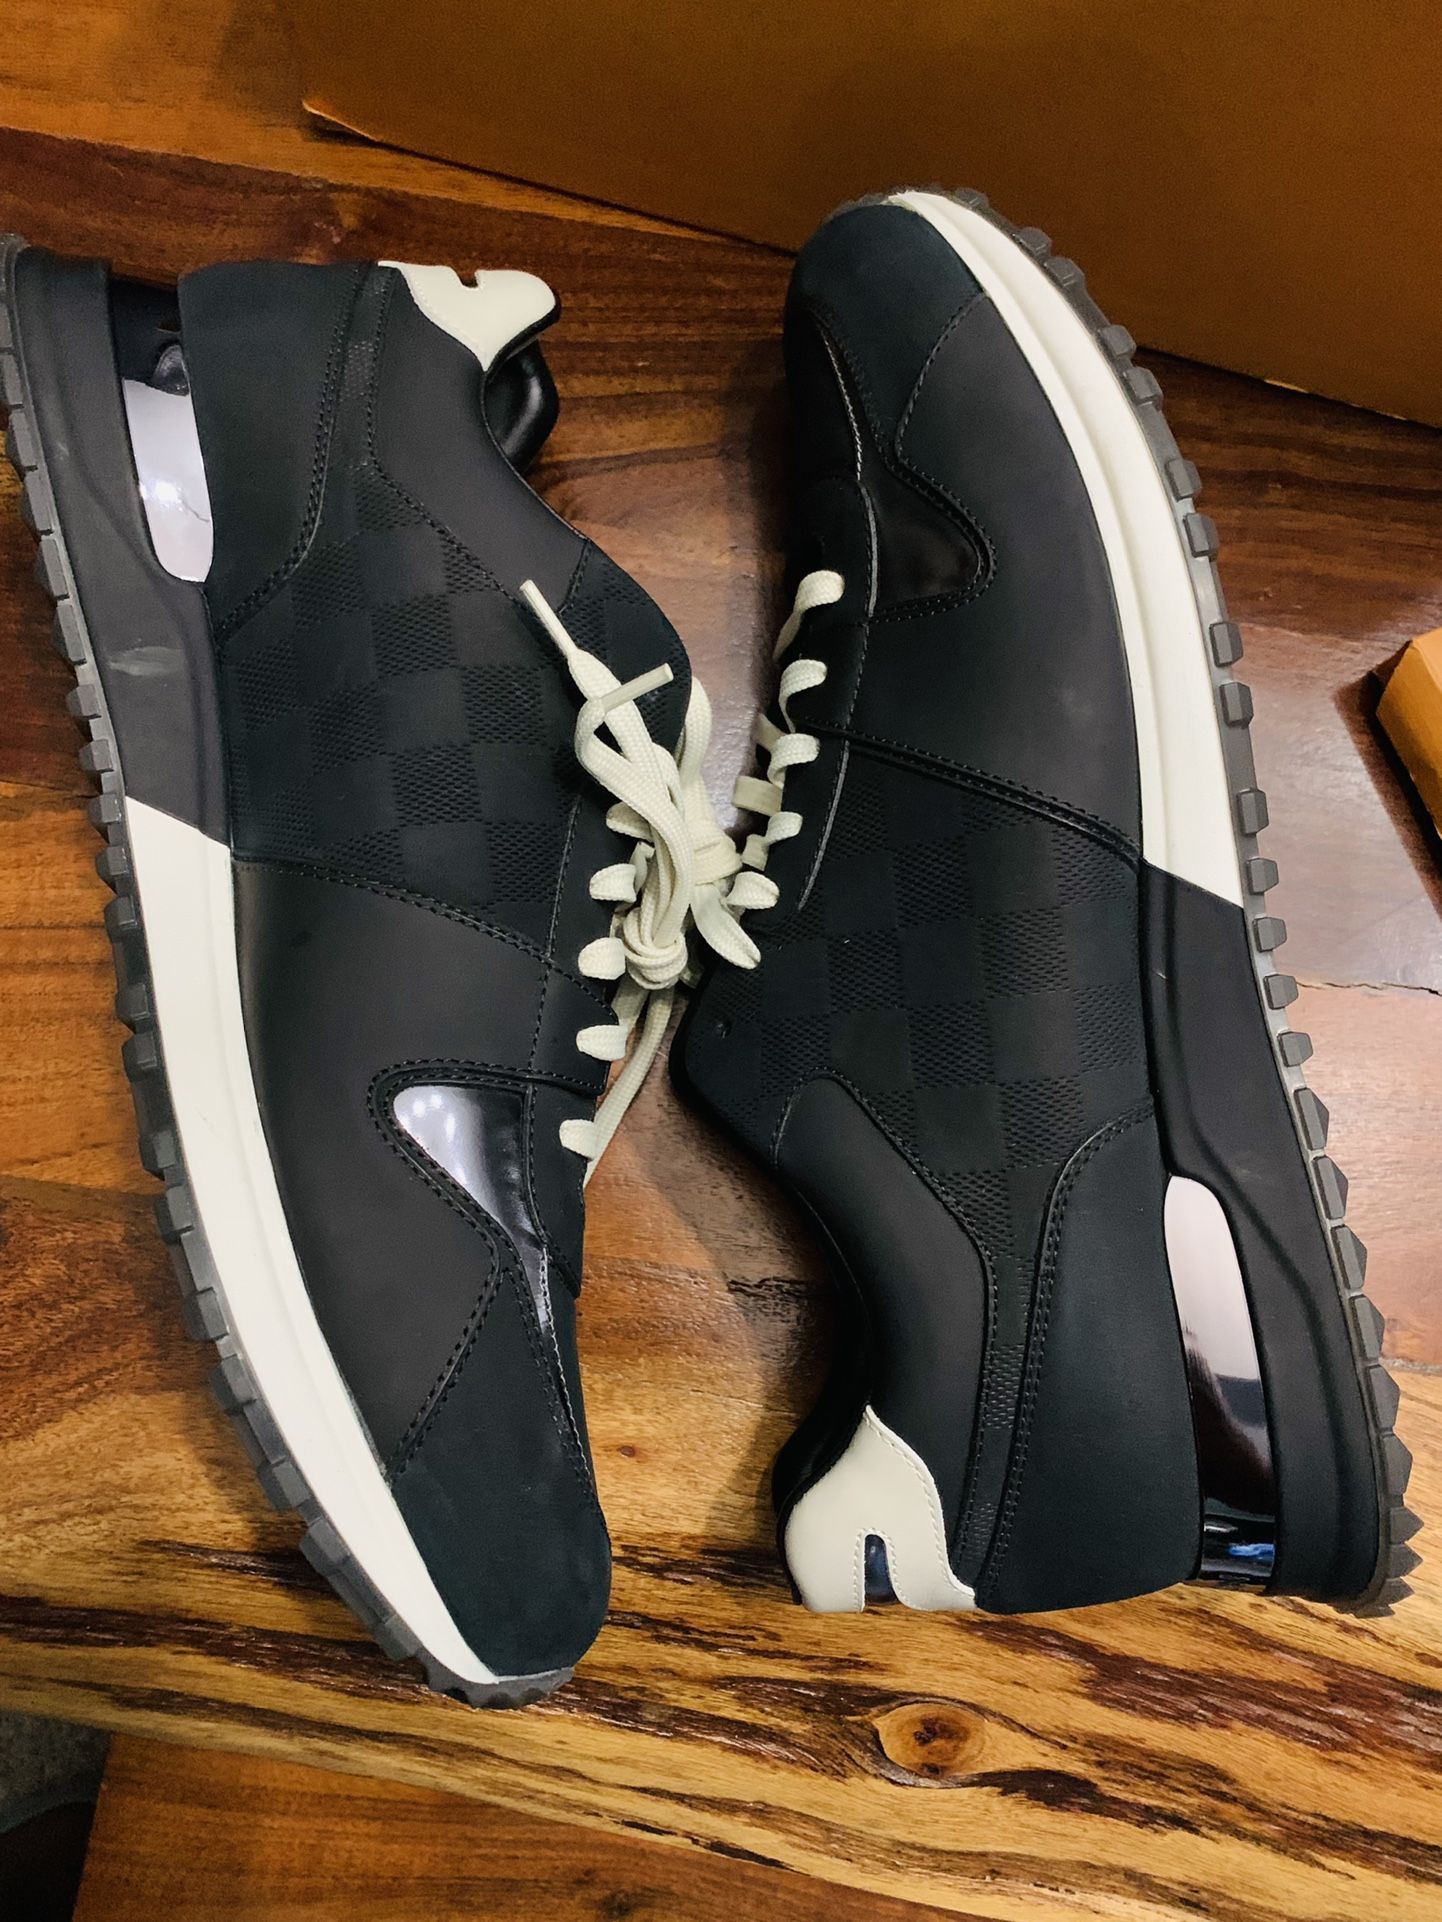 Sz 9 Louis Vuitton Mens Sneaker Match-Up Bicolor Sneakers 8.5/10 for Sale  in Revere, MA - OfferUp